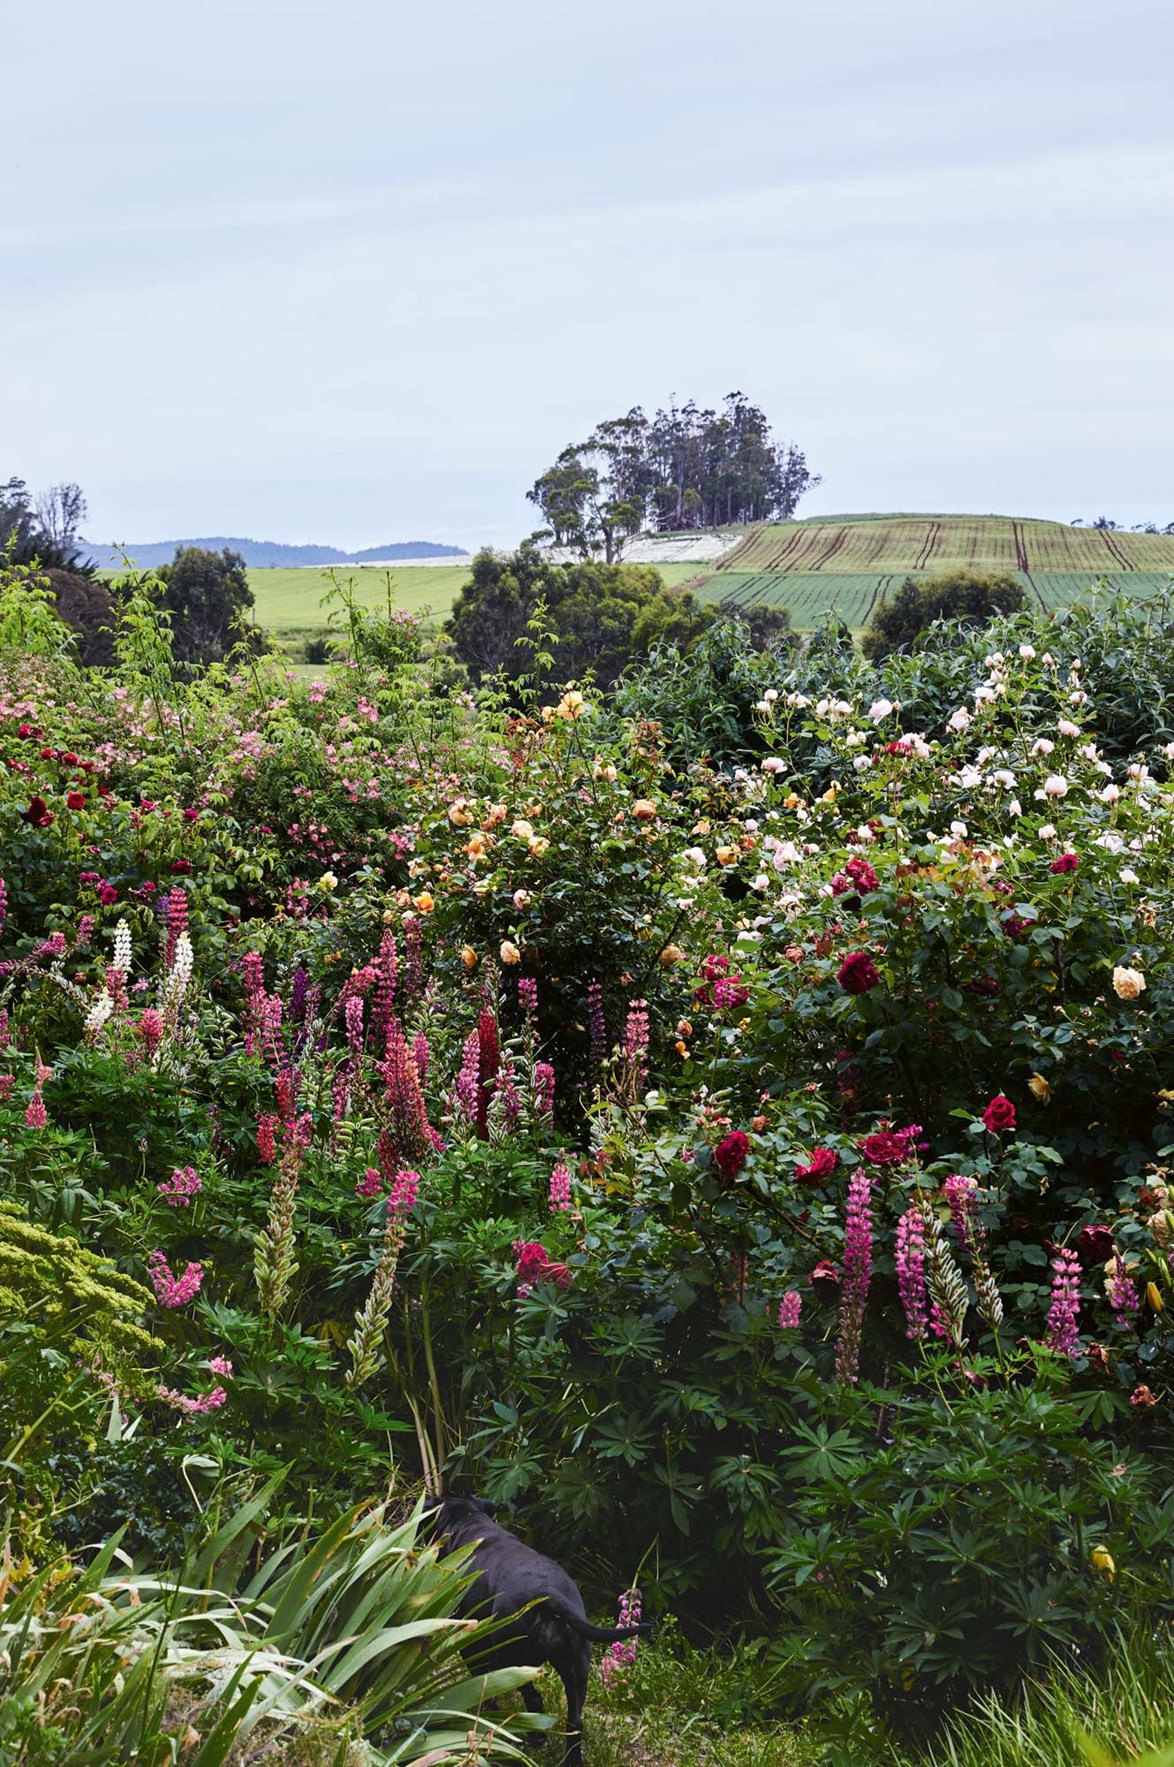 Sable the dog disappears into the rose bushes and other tall perennials. This sprawling garden is the brainchild of Tom Lyons and Fraser Young, who were inspired to create a [North Tasmanian garden] (https://www.homestolove.com.au/rose-haven-a-lush-garden- in- northern-tasmania-14015|target="_blank") after attending a seminar by gardening author Susan Irvine. *Photo: Mark Roper*